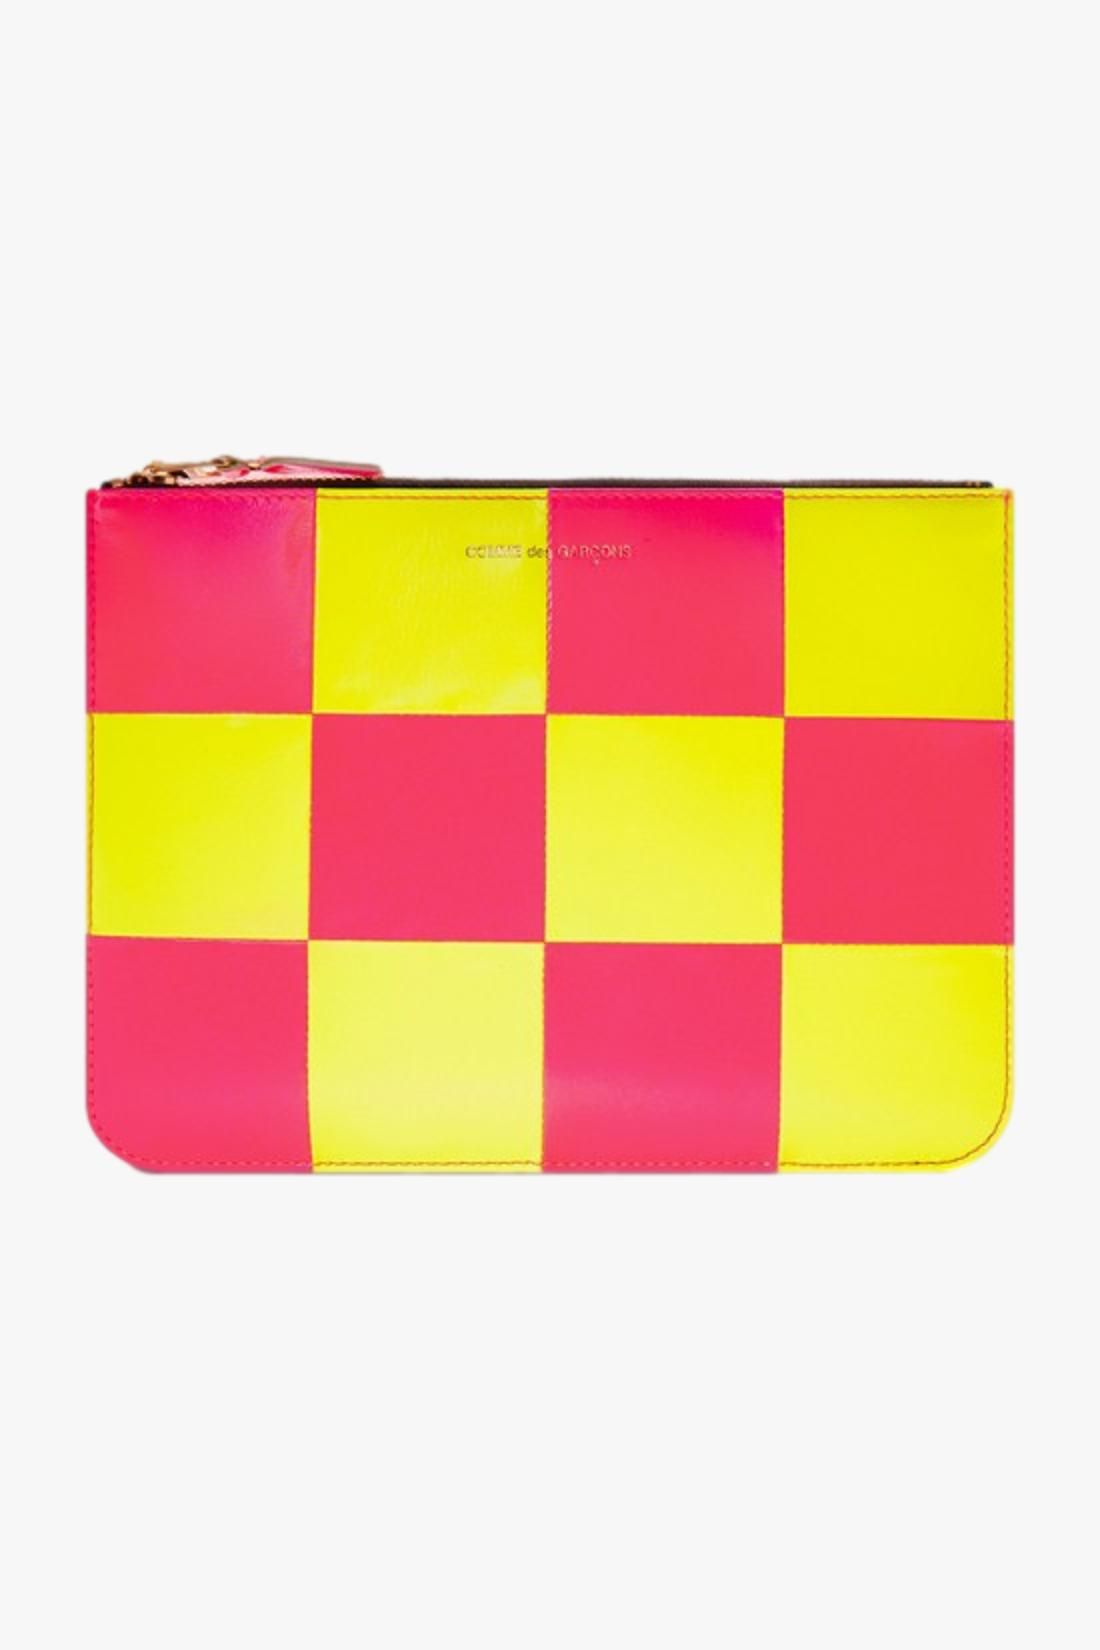 Cdg wallet fluo squares Yellow pink